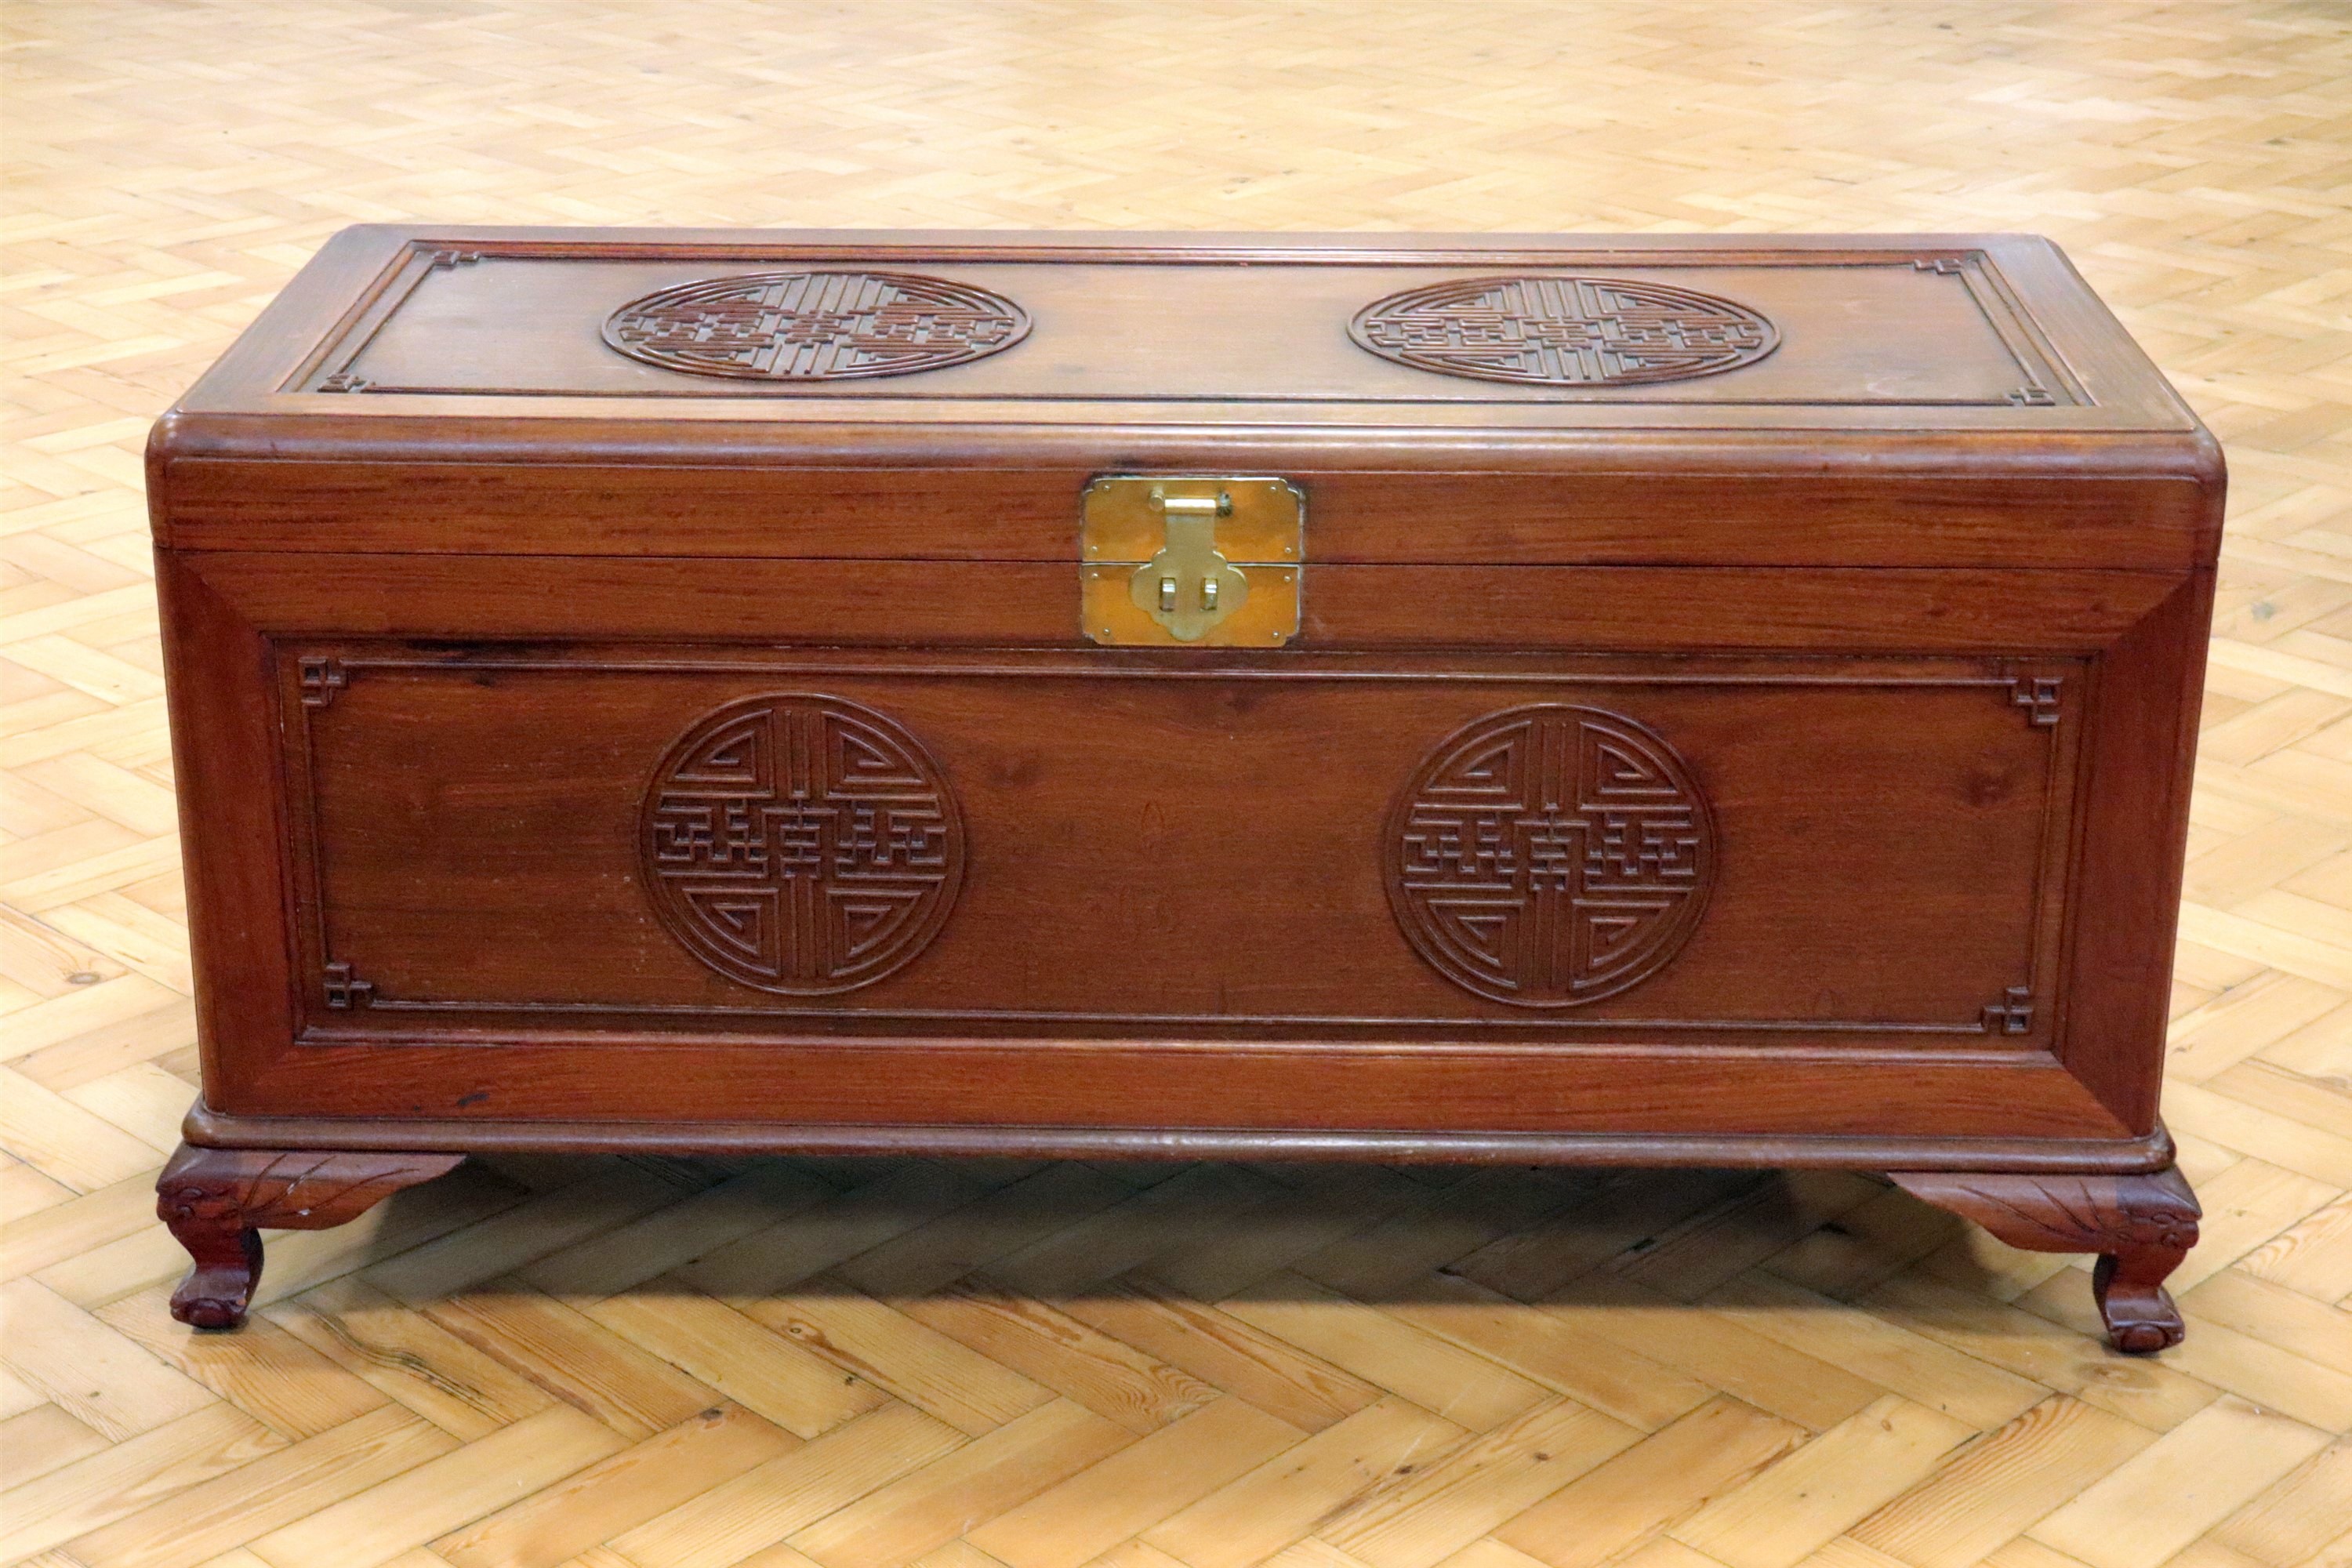 A mid-to-late 20th Century Chinese carved camphor wood chest, 123 cm x 53 cm x 60 cm high